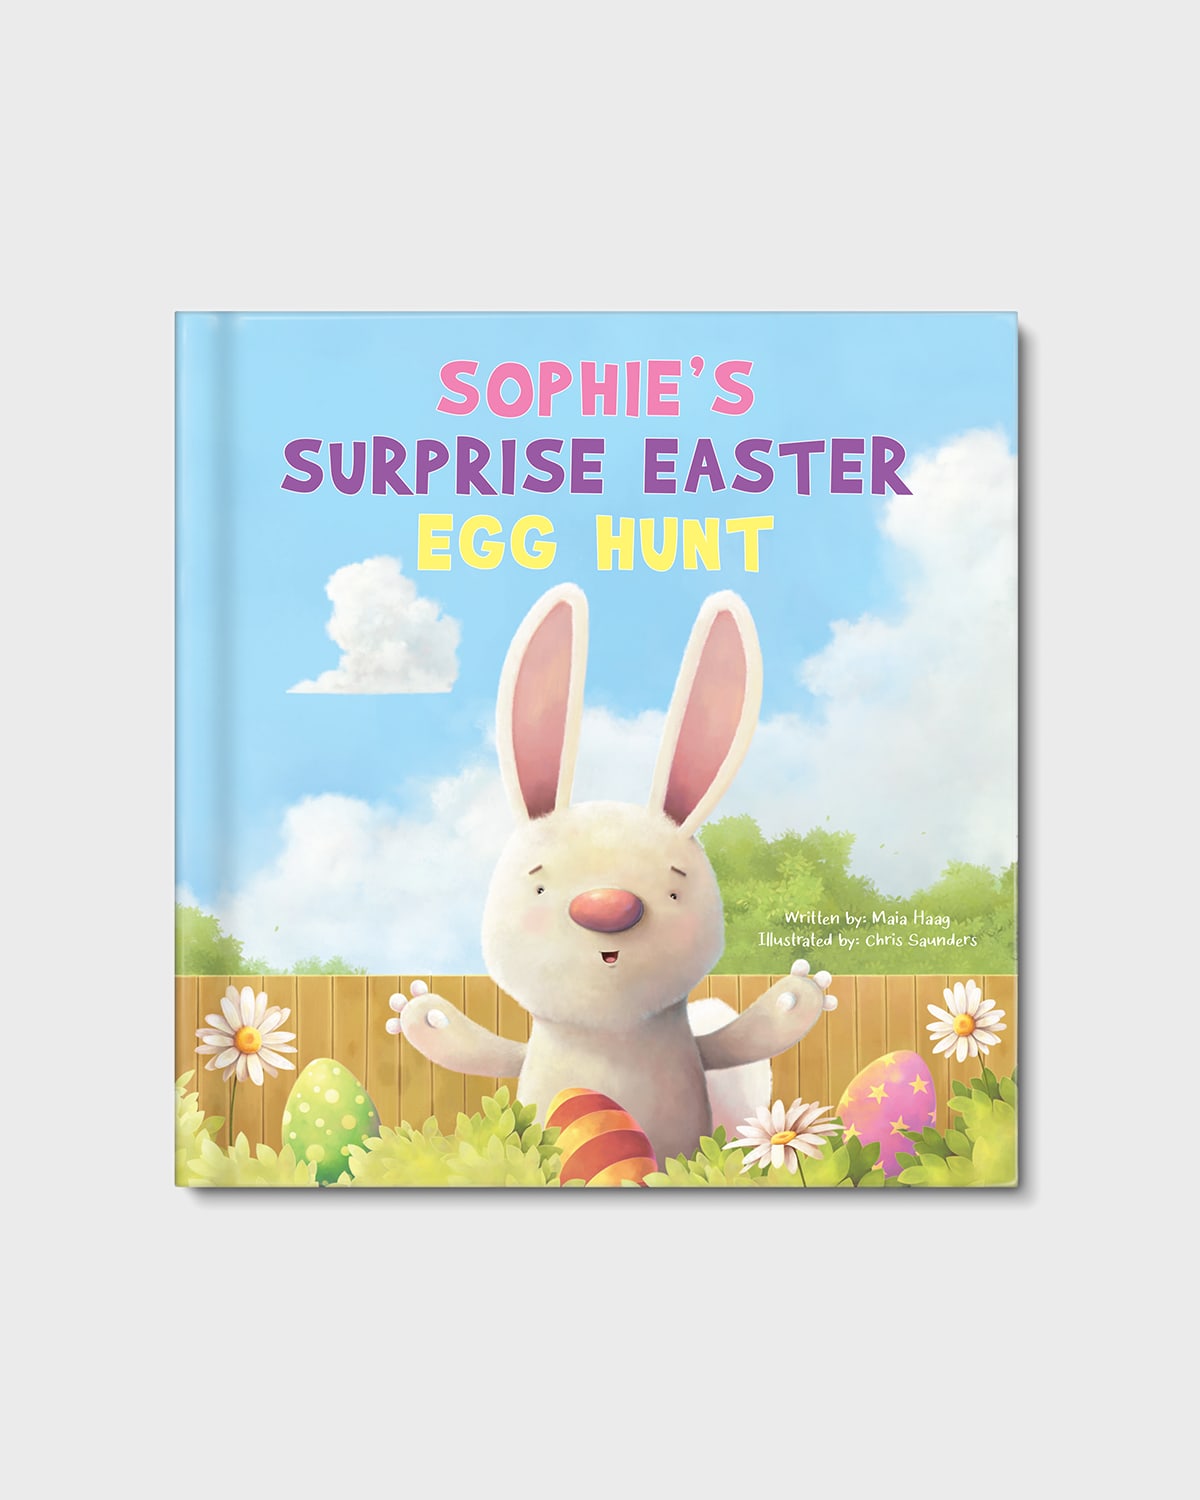 My Surprise Easter Egg Hunt Book by Maia Haag, Personalized